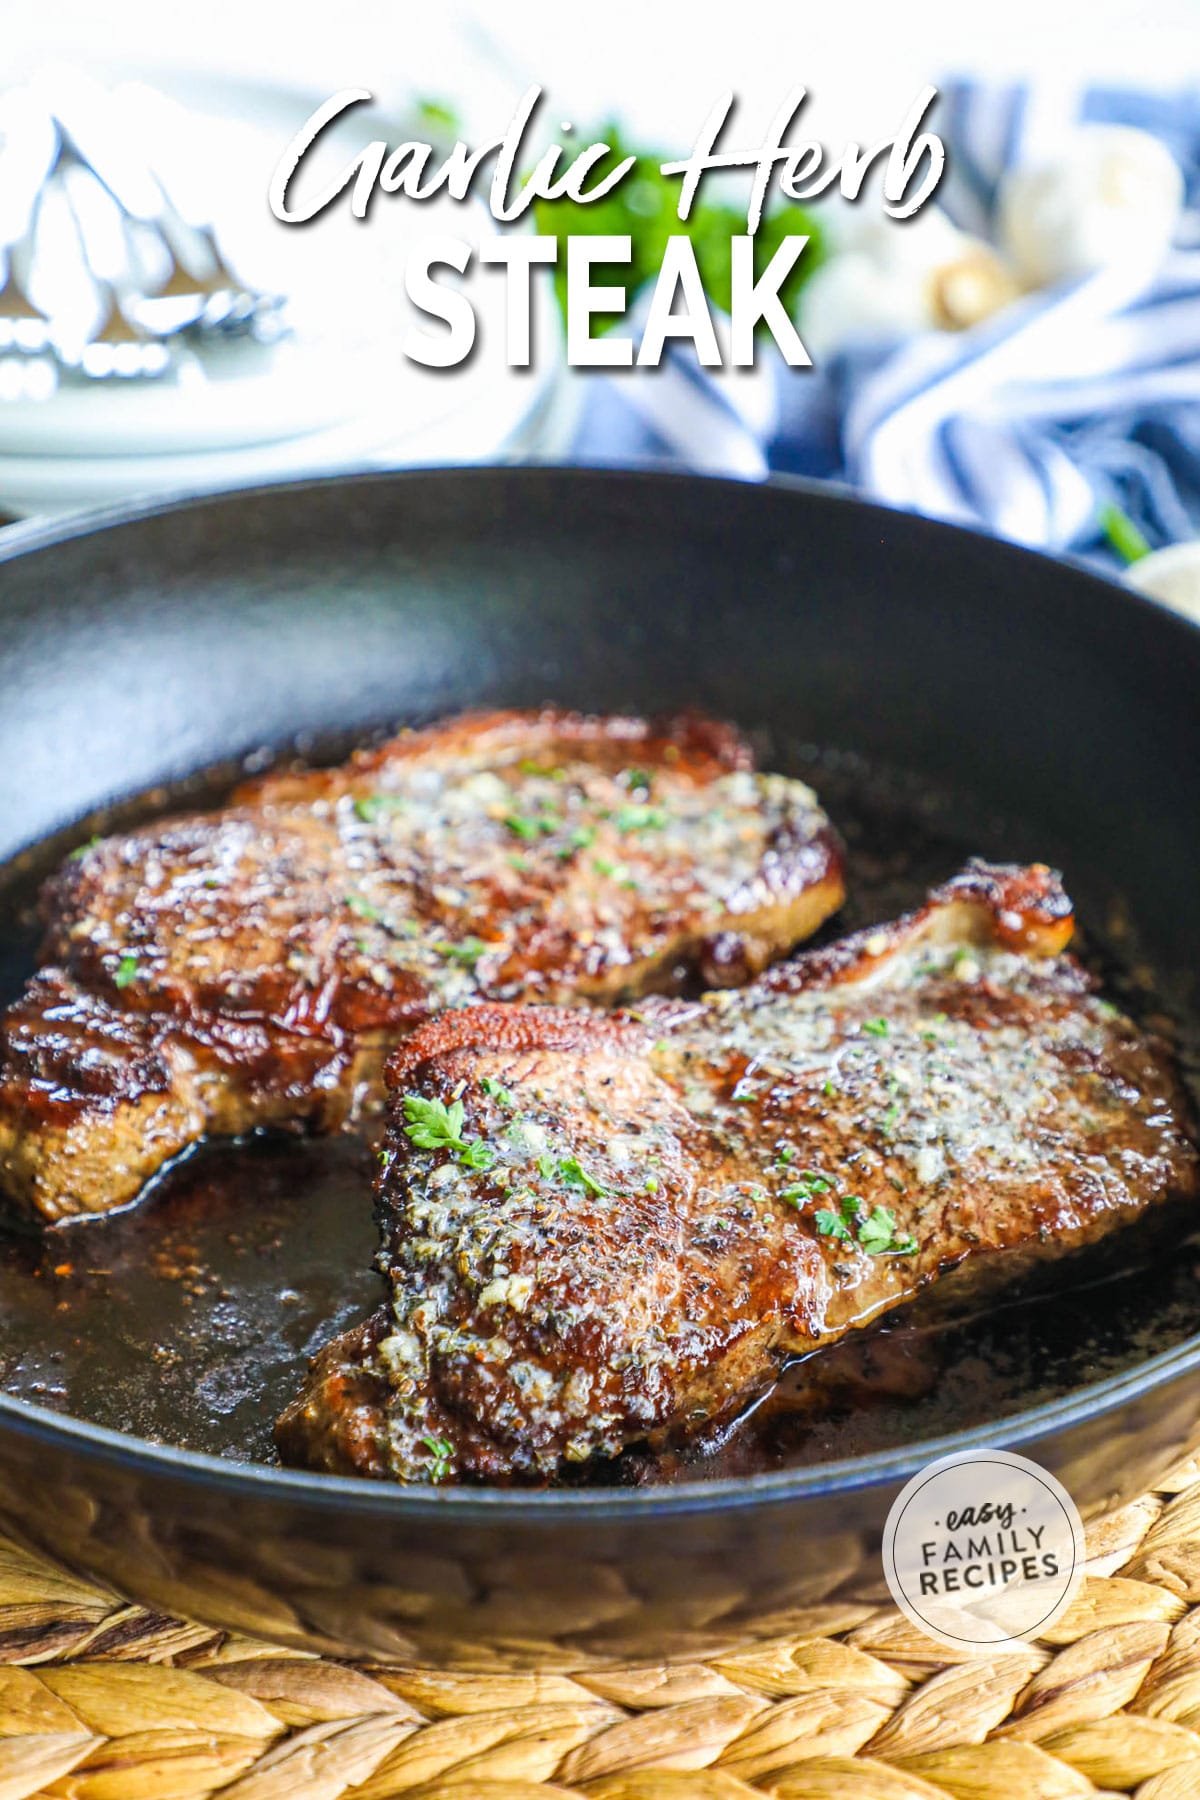 Two pieces of seared steak in a cast iron skillet with green herbs on top.